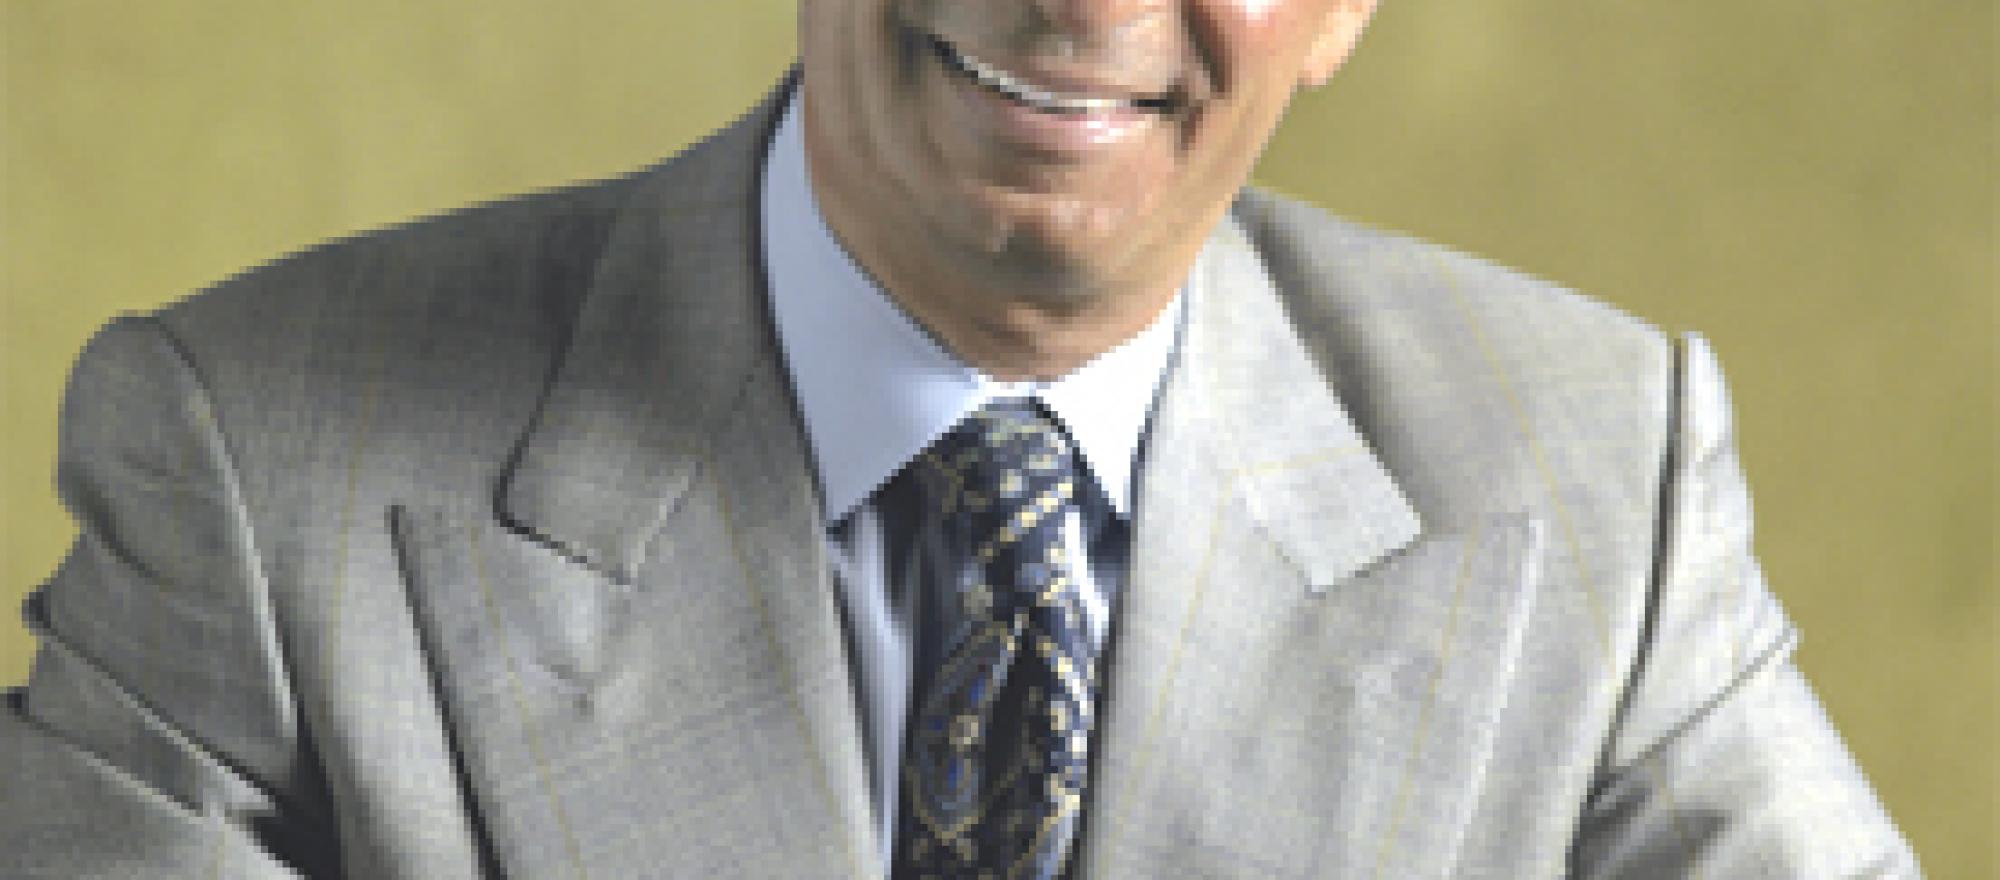 Richard Santulli wrote the rules on fractional ownership, and in the process 